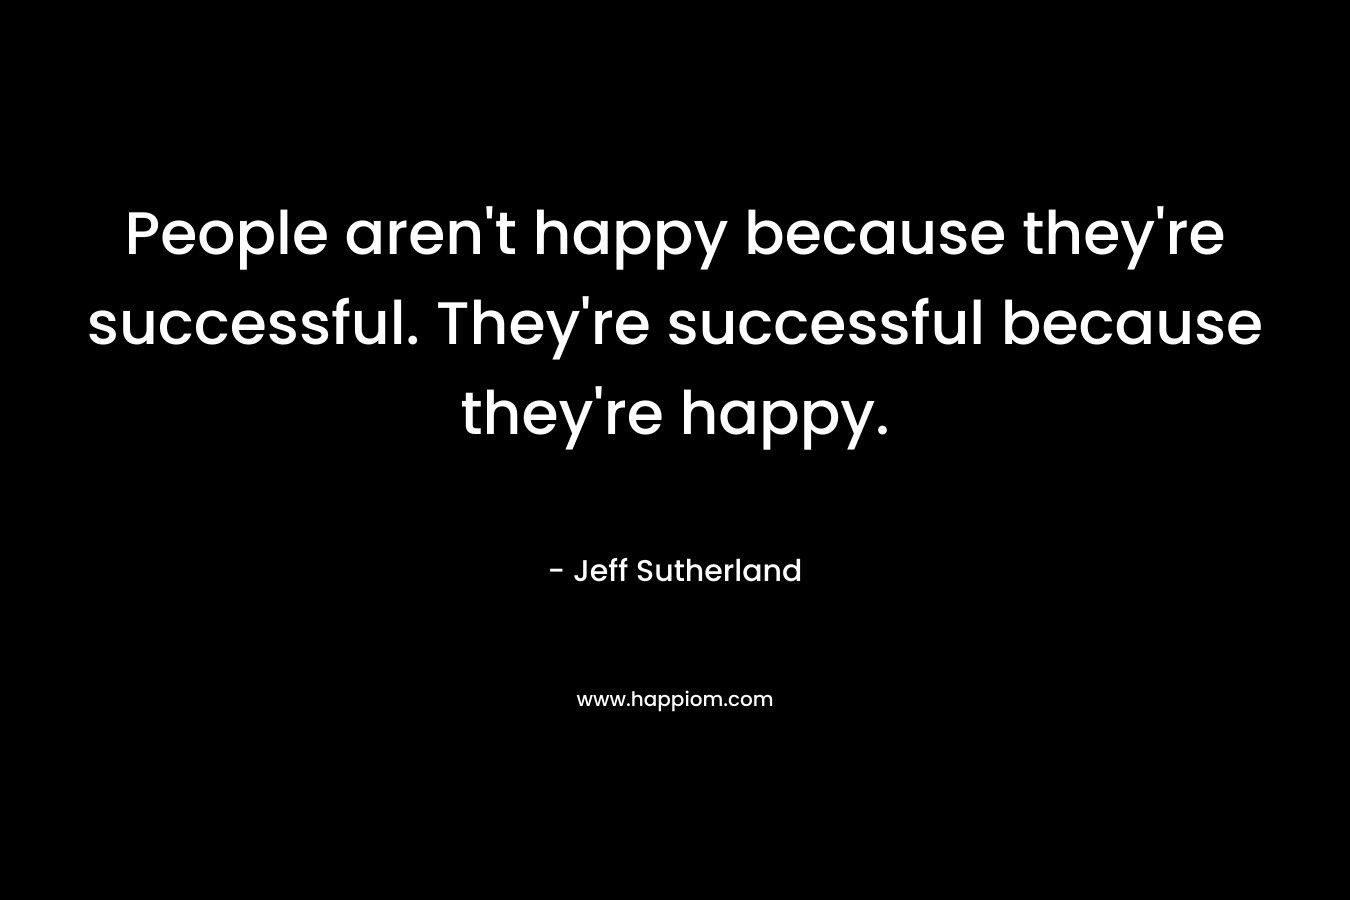 People aren’t happy because they’re successful. They’re successful because they’re happy. – Jeff Sutherland